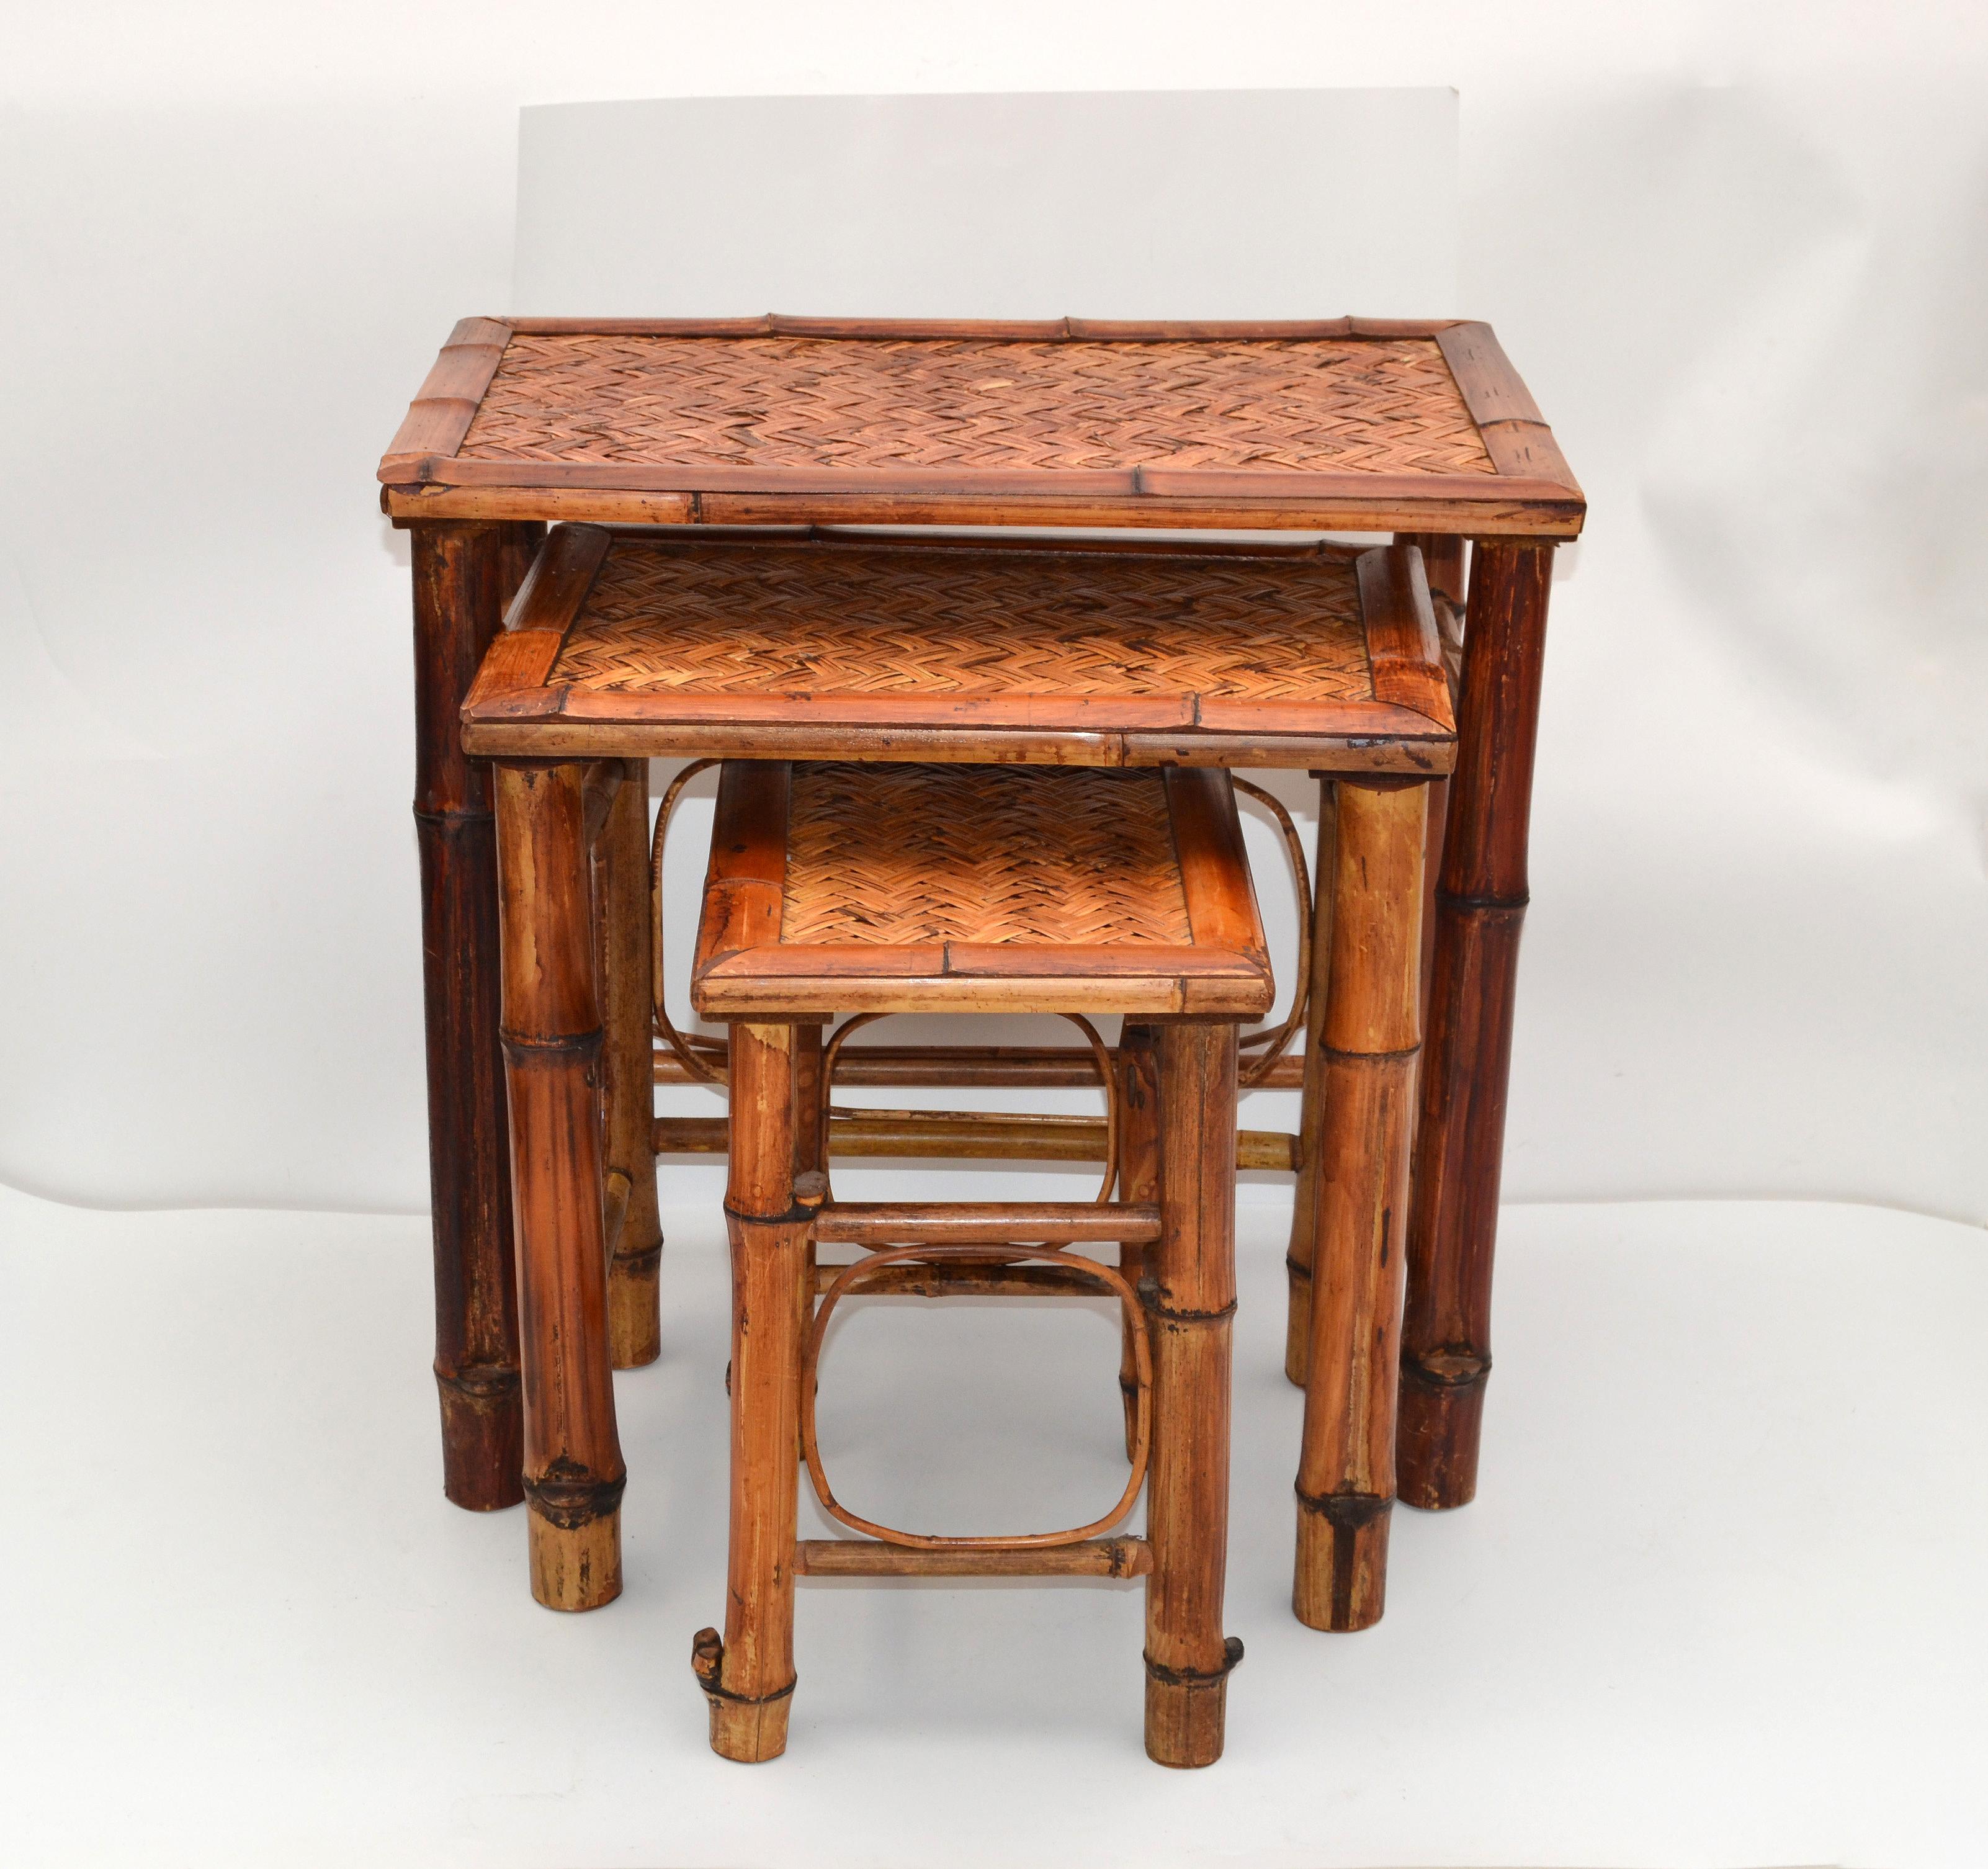 Chinese Chinoiserie Bamboo & Cane Nesting Tables Stacking Tables Handcrafted Set of 3 For Sale